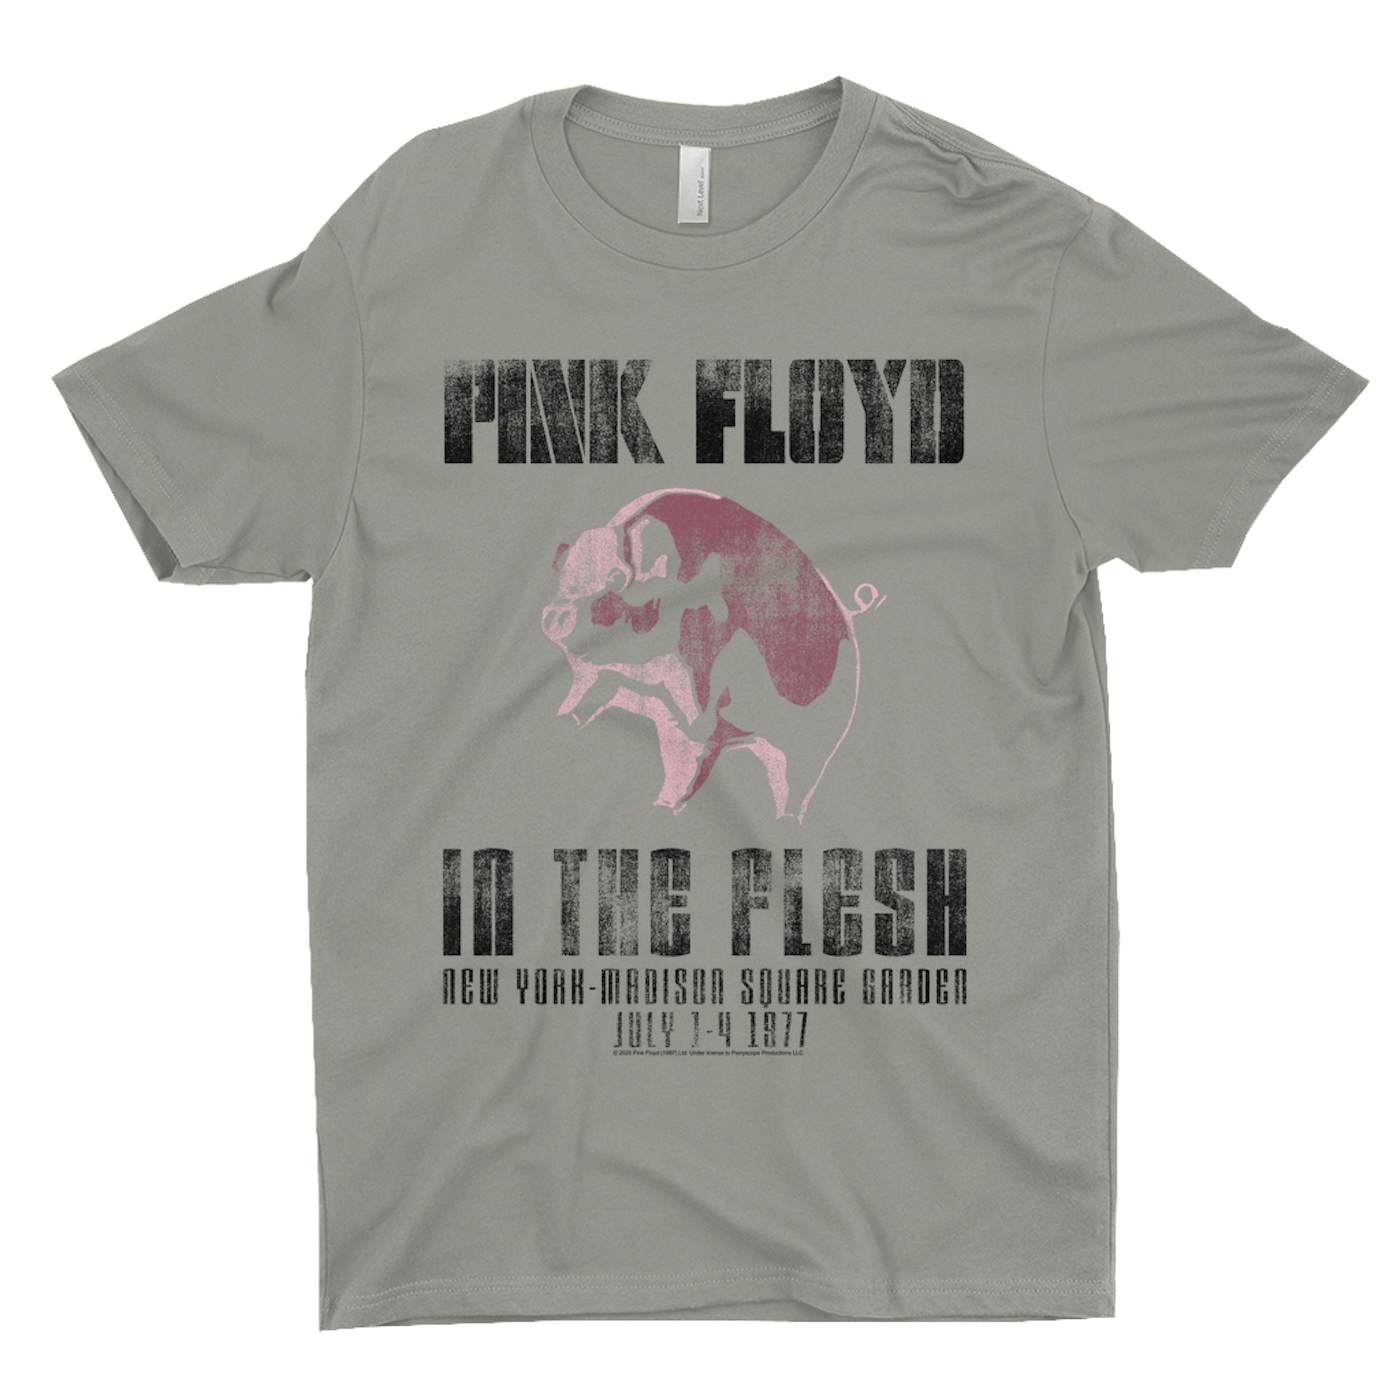 Pink Floyd T-Shirt | In The Flesh 1977 NYC Madison Square Garden Concert Pink Floyd Shirt